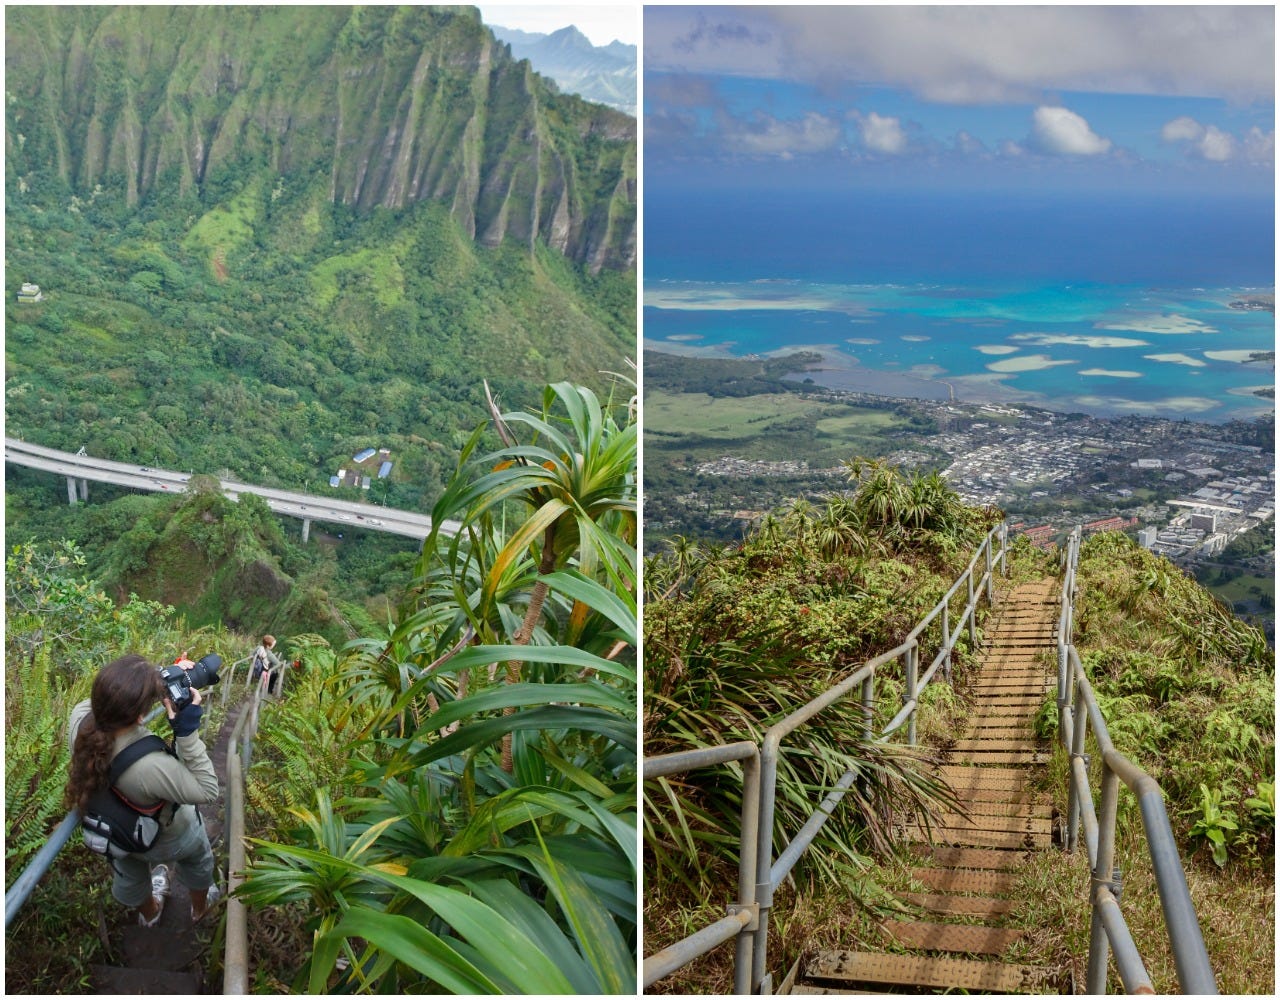 An image of a hiker taking a photo while walking the Haiku Stairs (left) and an image of the view from the top of the stairs (right).